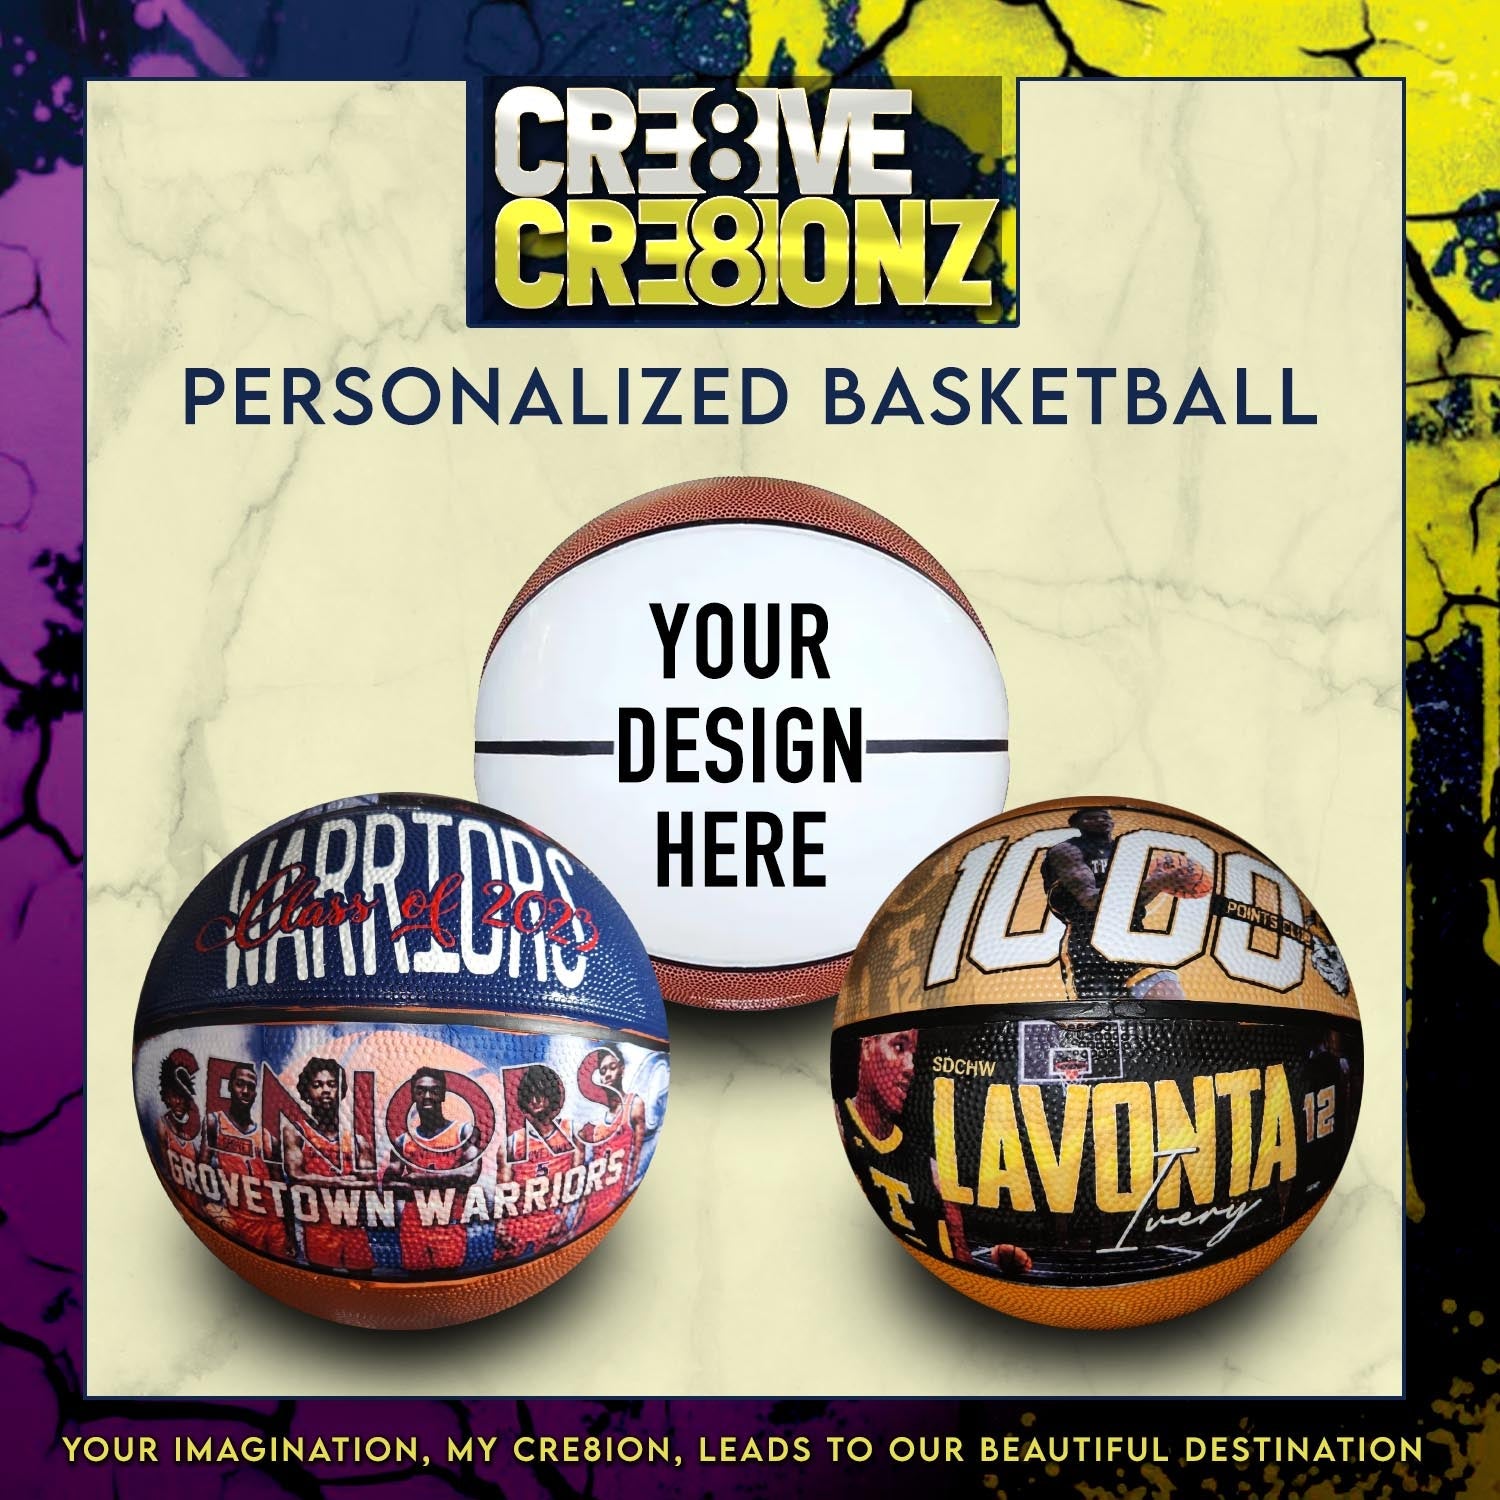 Custom Personalized Basketball - Cre8ive Cre8ionz